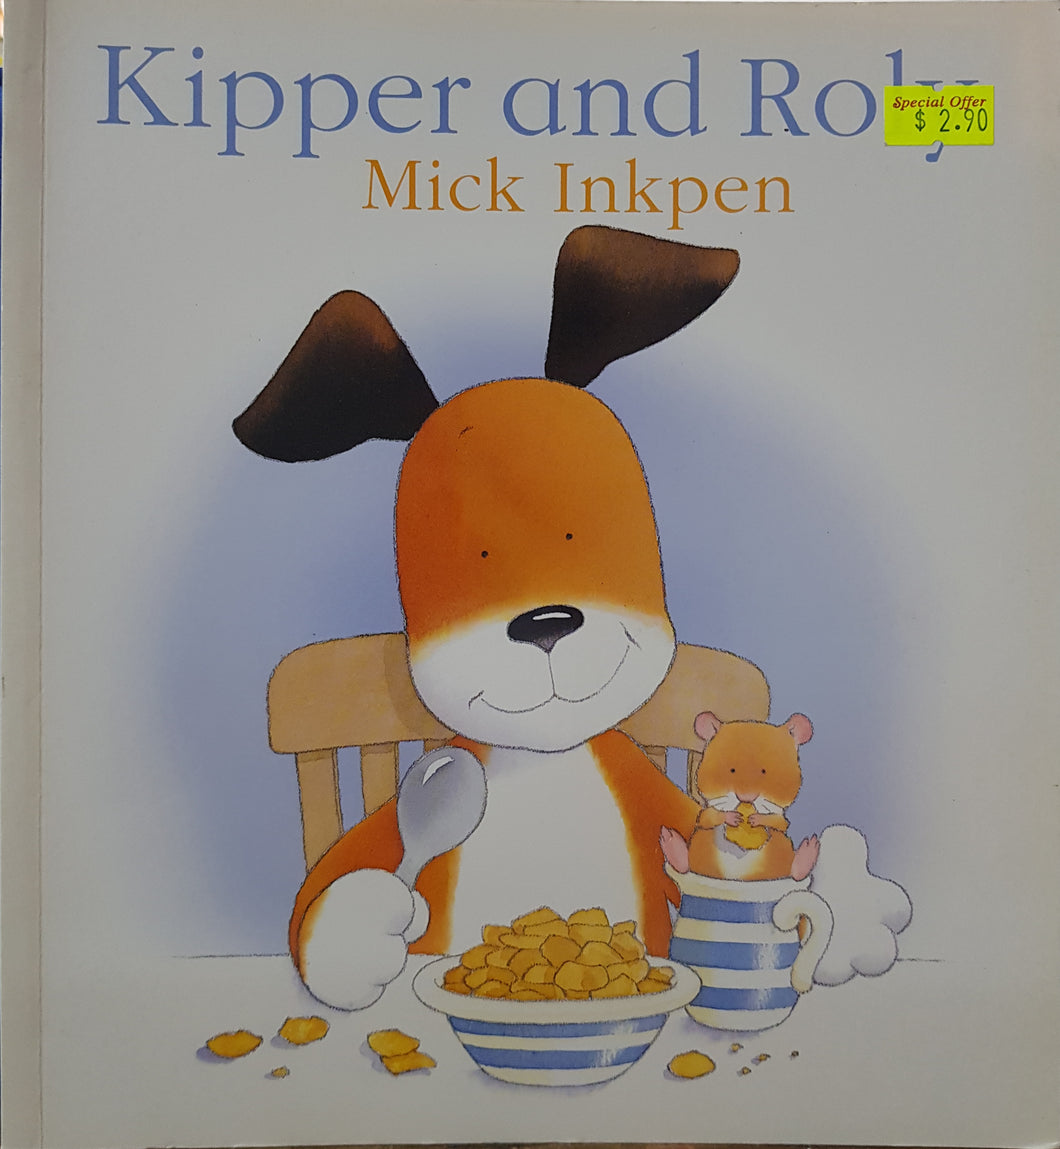 Kipper and Roly - Mick Inkpen